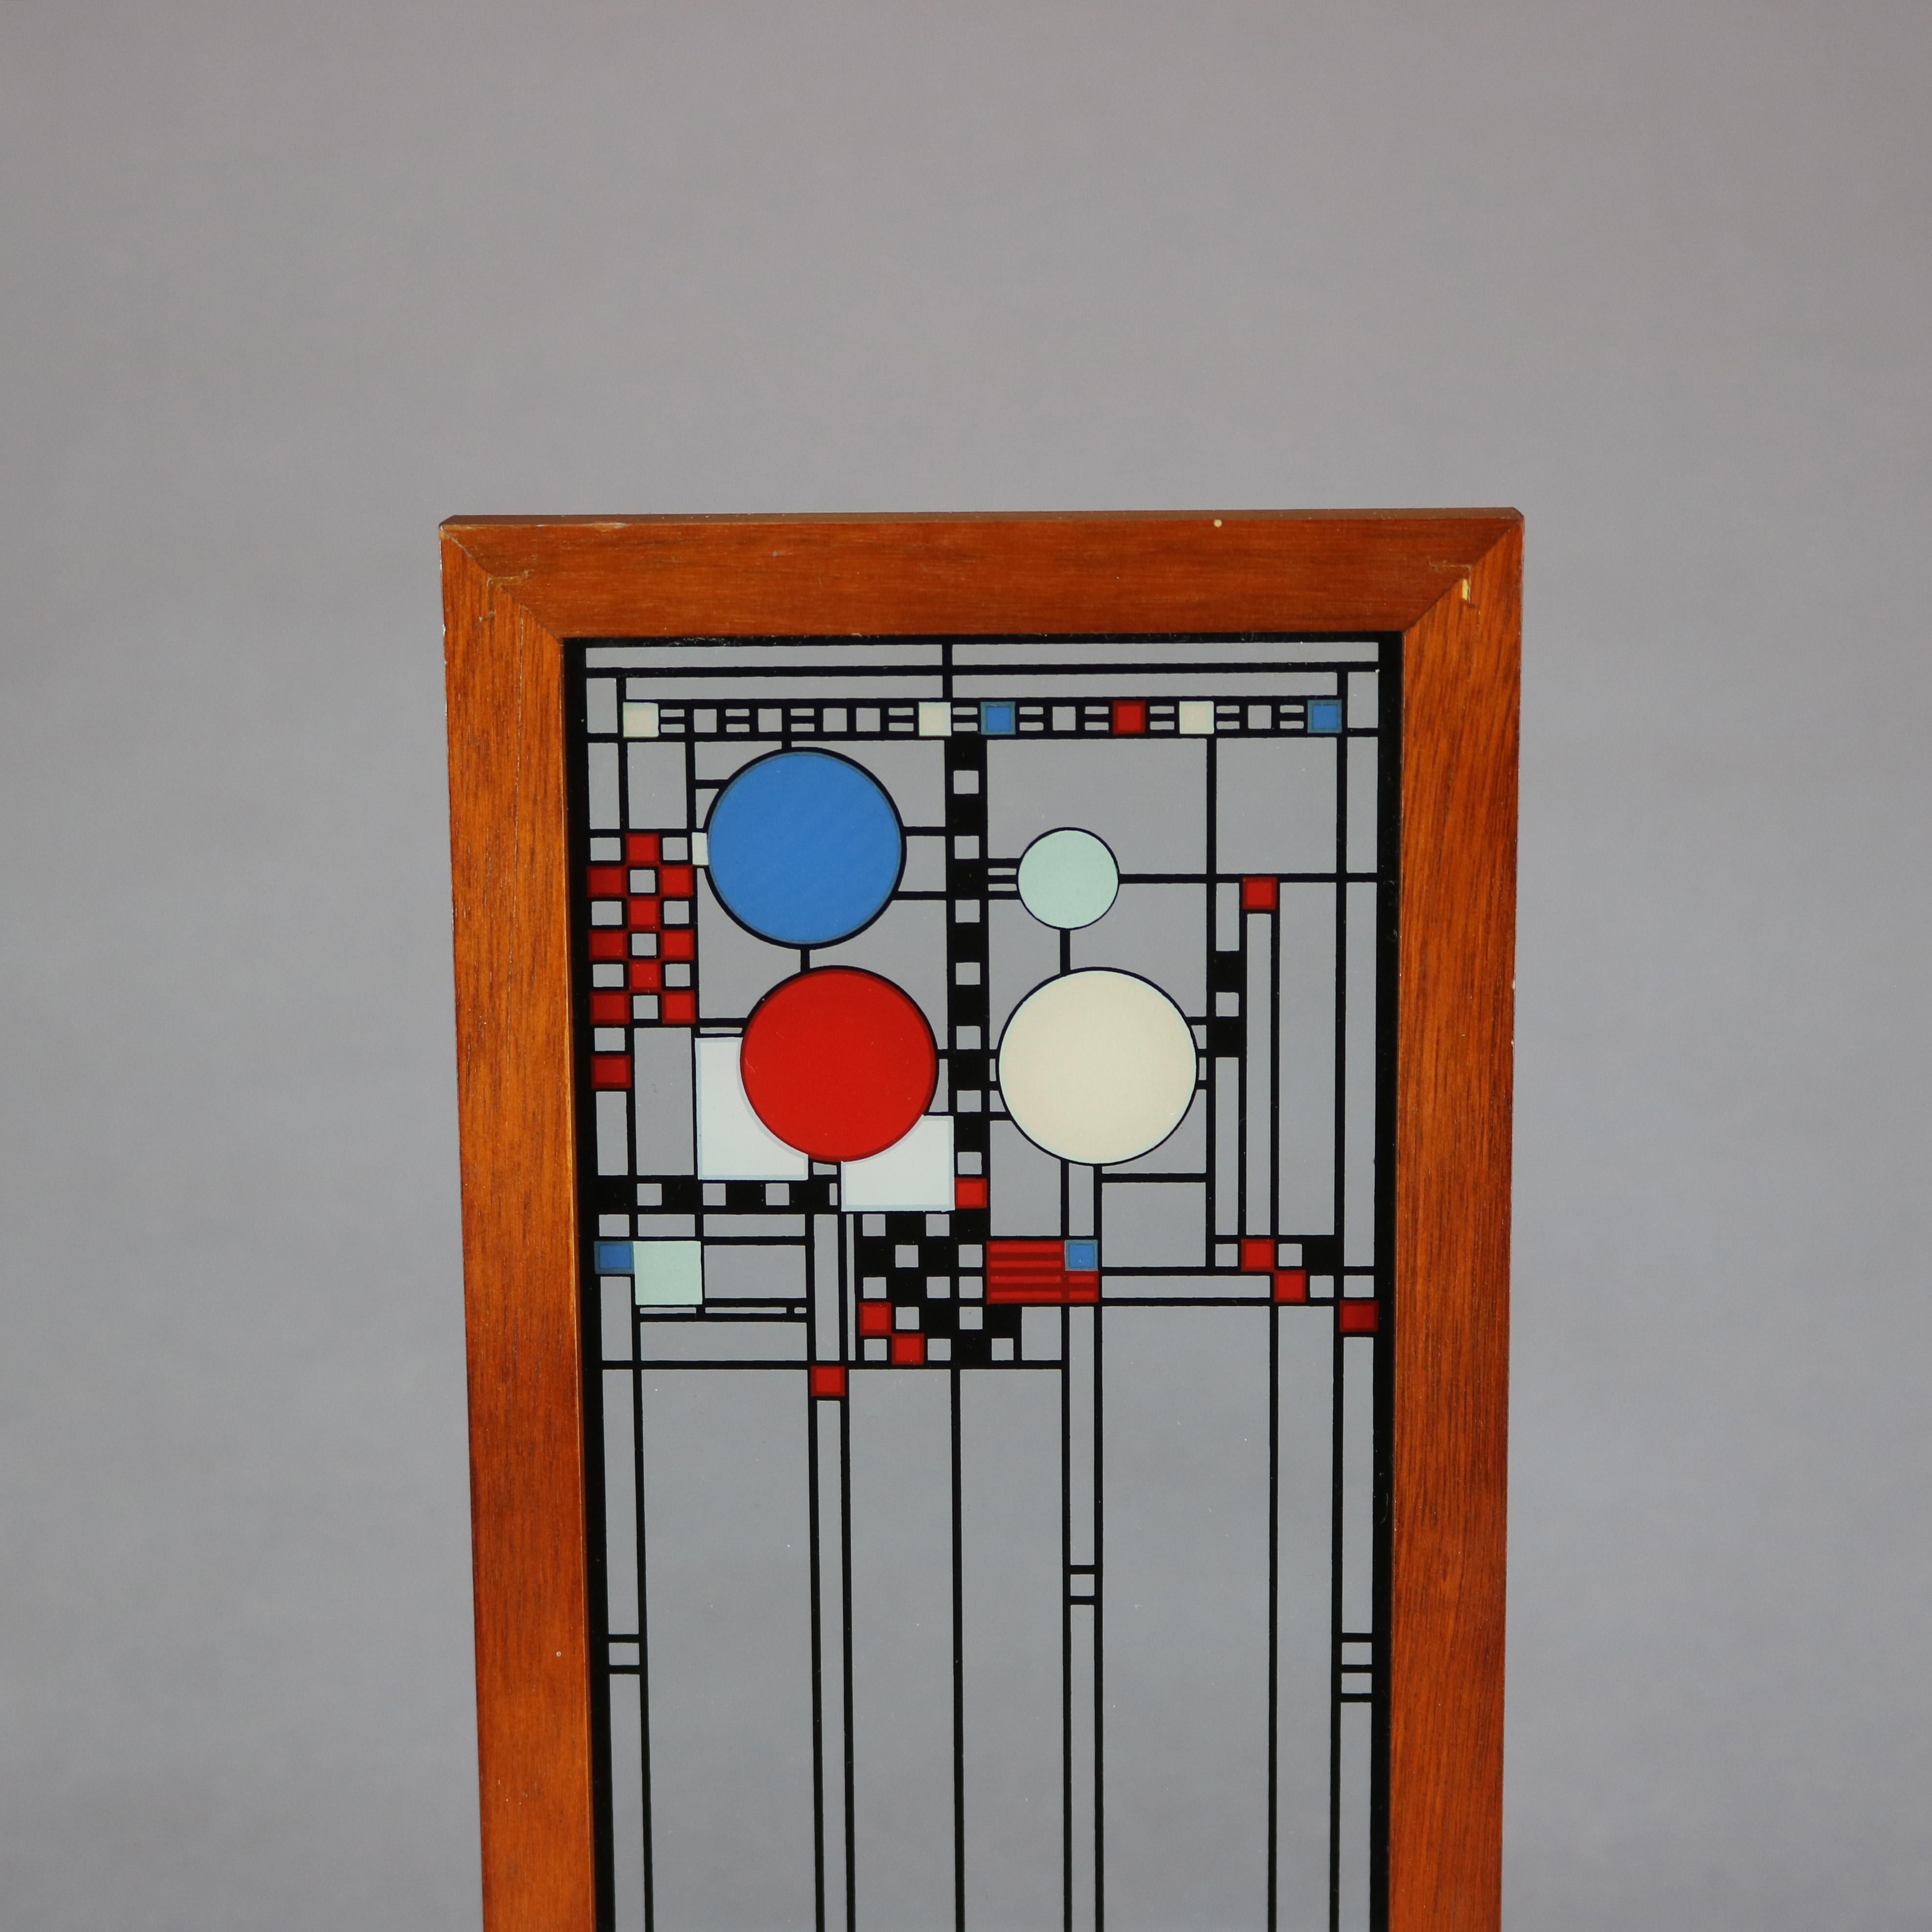 Frank Lloyd Wright Foundation (FLLW Fdn.), Metropolitan Museum of Art (MMA) Prairie School glass panel depicts enameled replica of Avery Coonley Playhouse glass panels, seated in wood stand with identifying brass plate as photographed, 20th